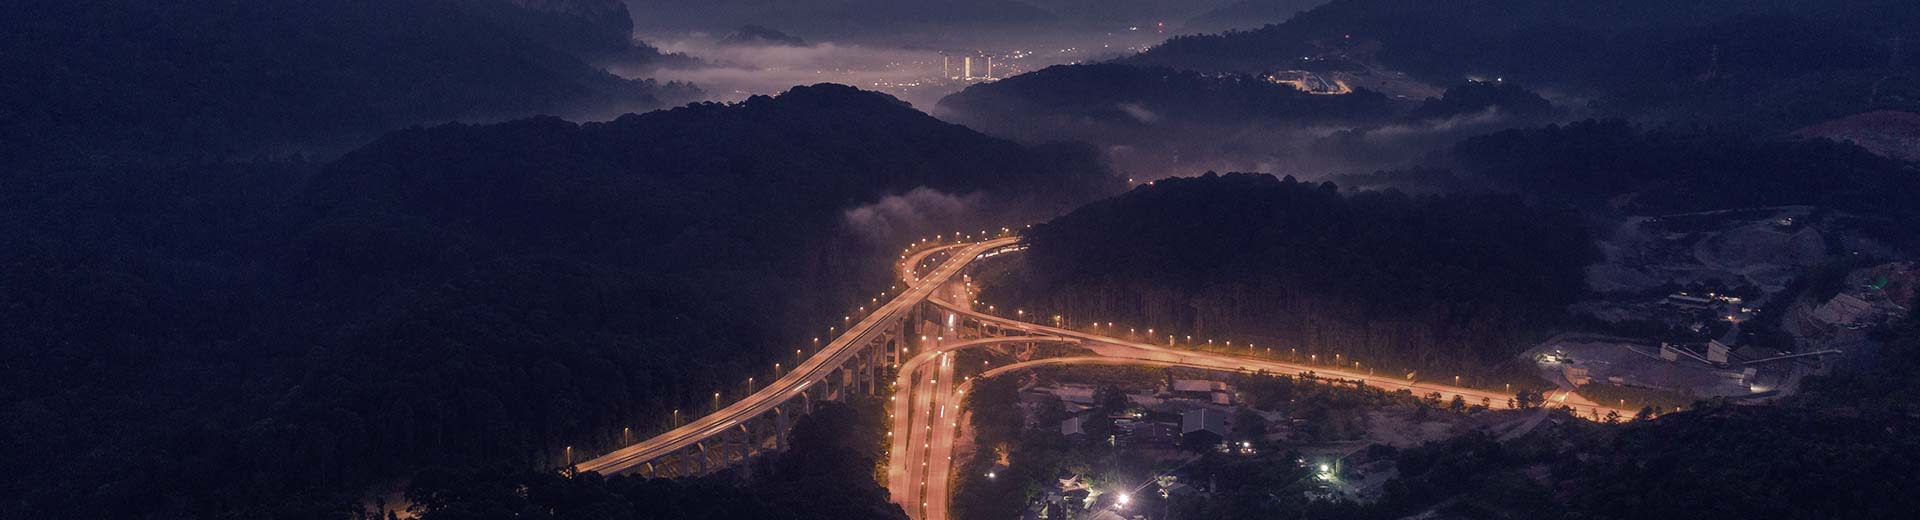 Dark hills suround a brightly lit highway, with the lights of Rawang in the distance.